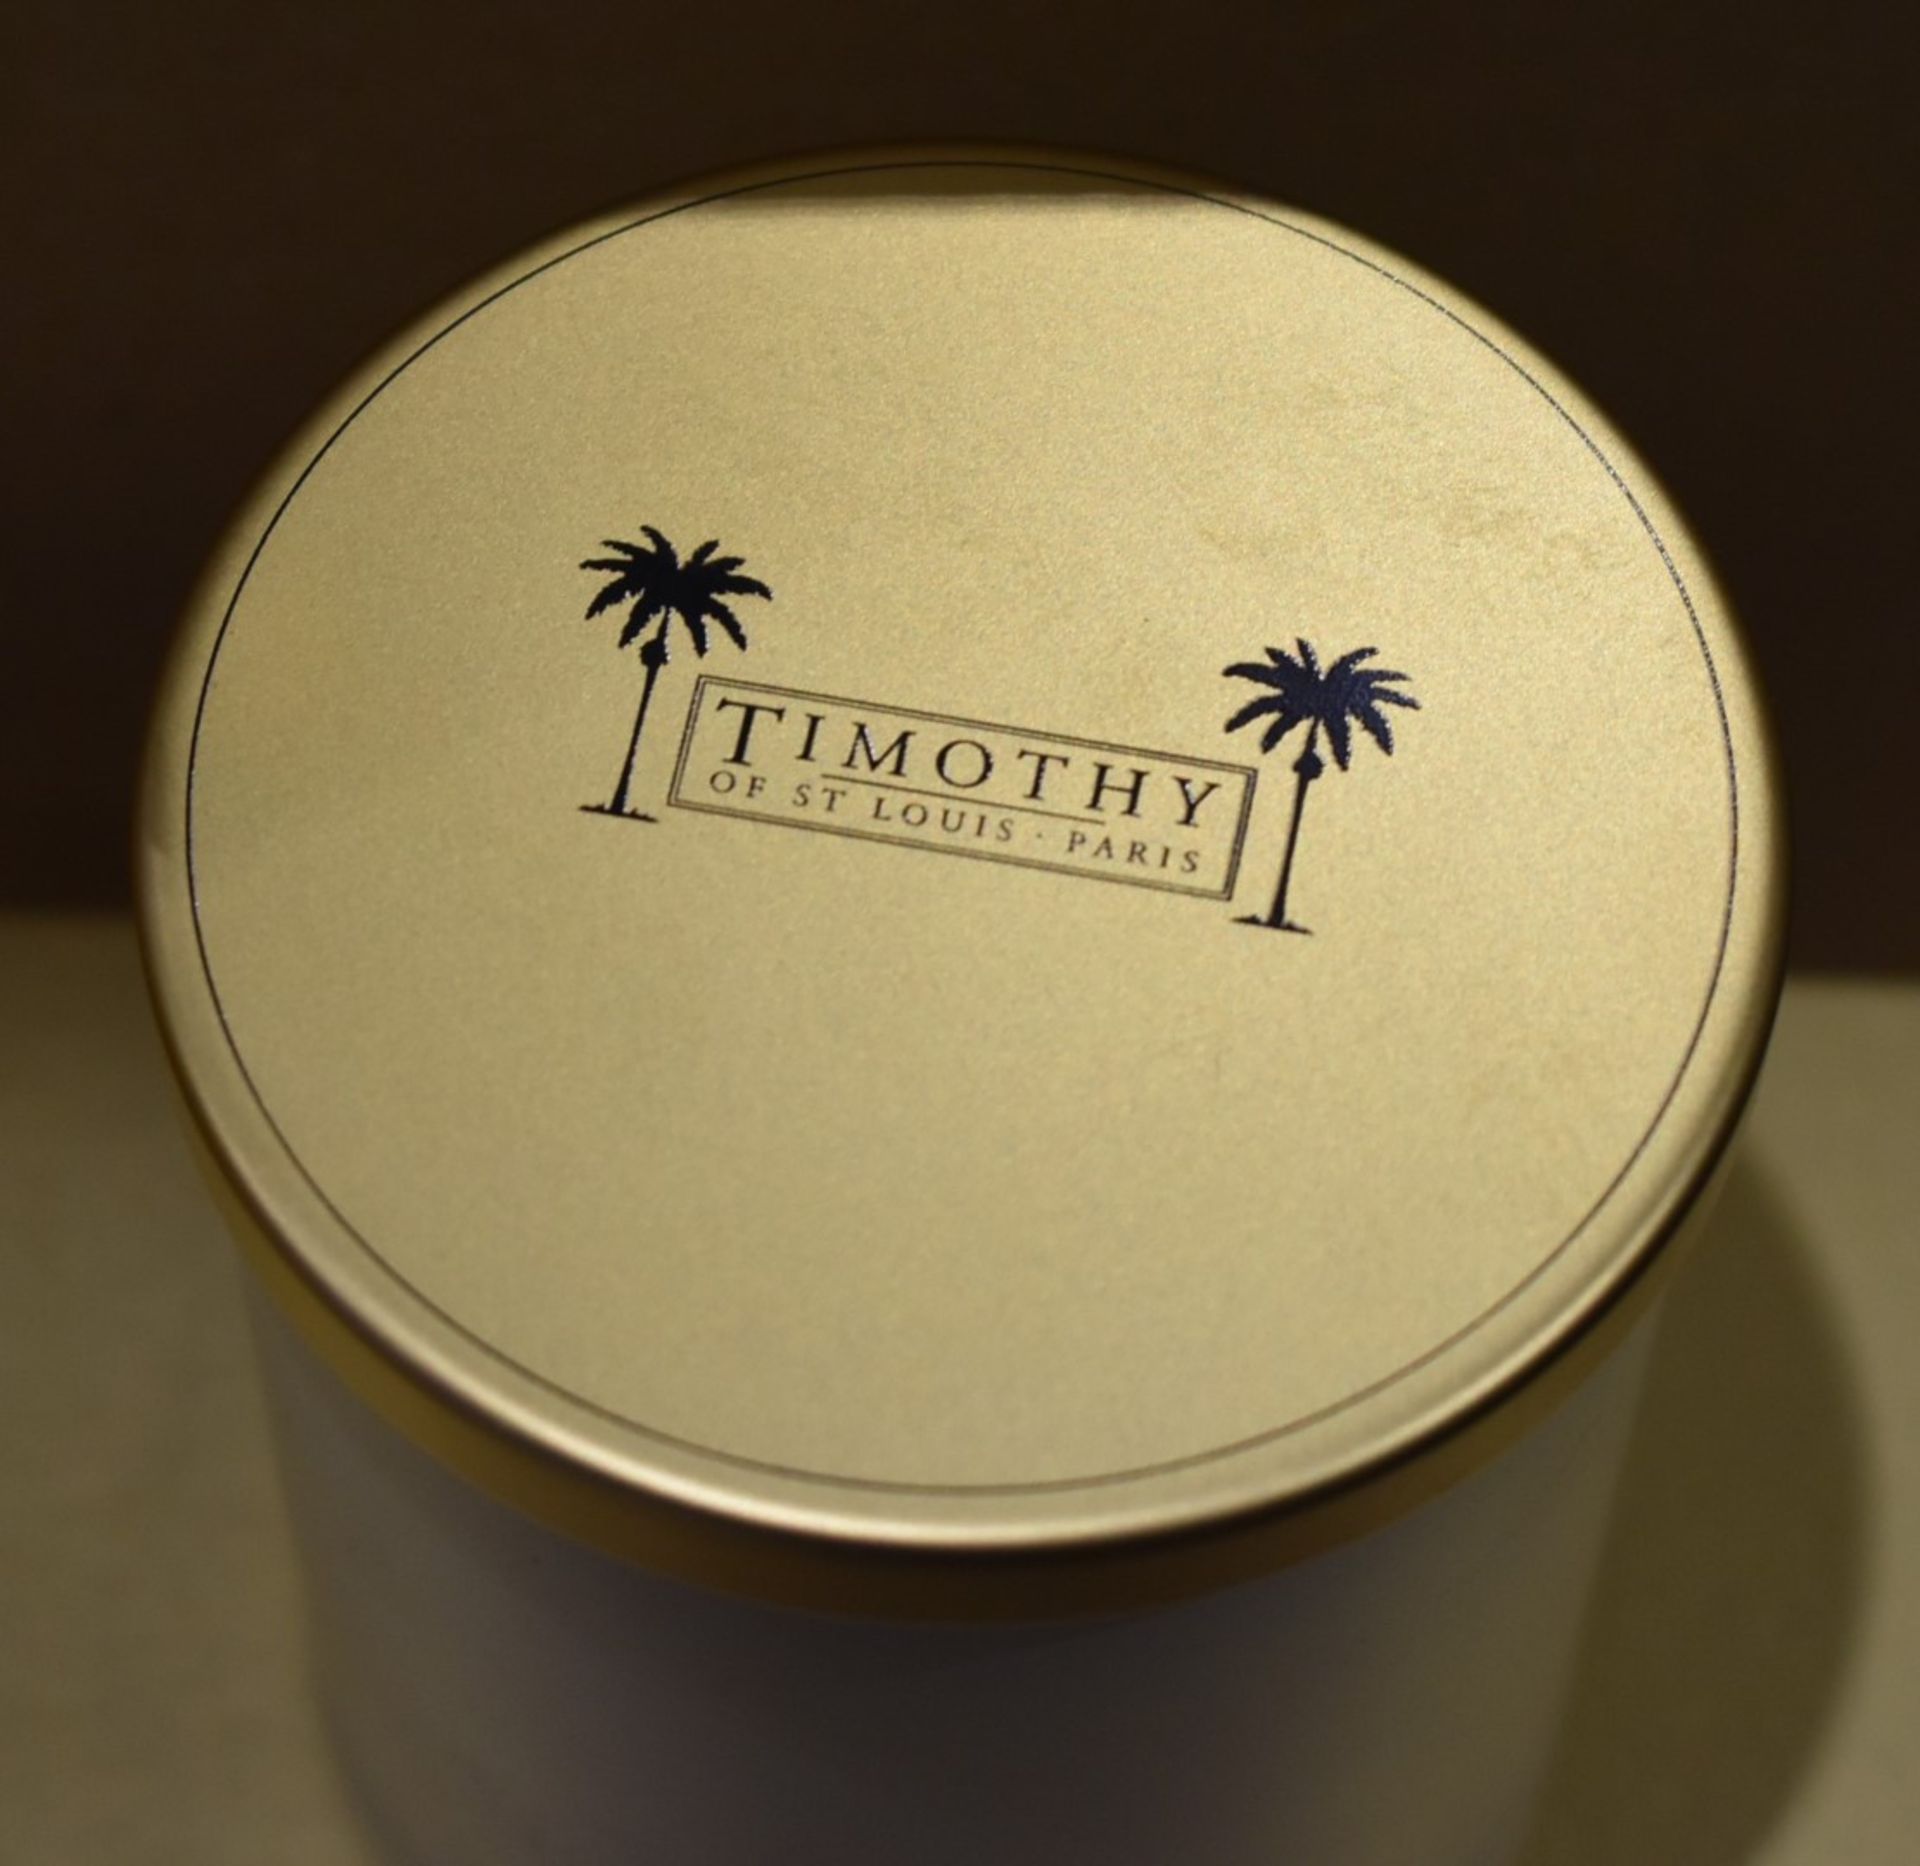 2 x Timothy of St Louis Perfumed Candle - The & Bois - Brand New and Boxed - 150g Scented Candles - Image 3 of 5